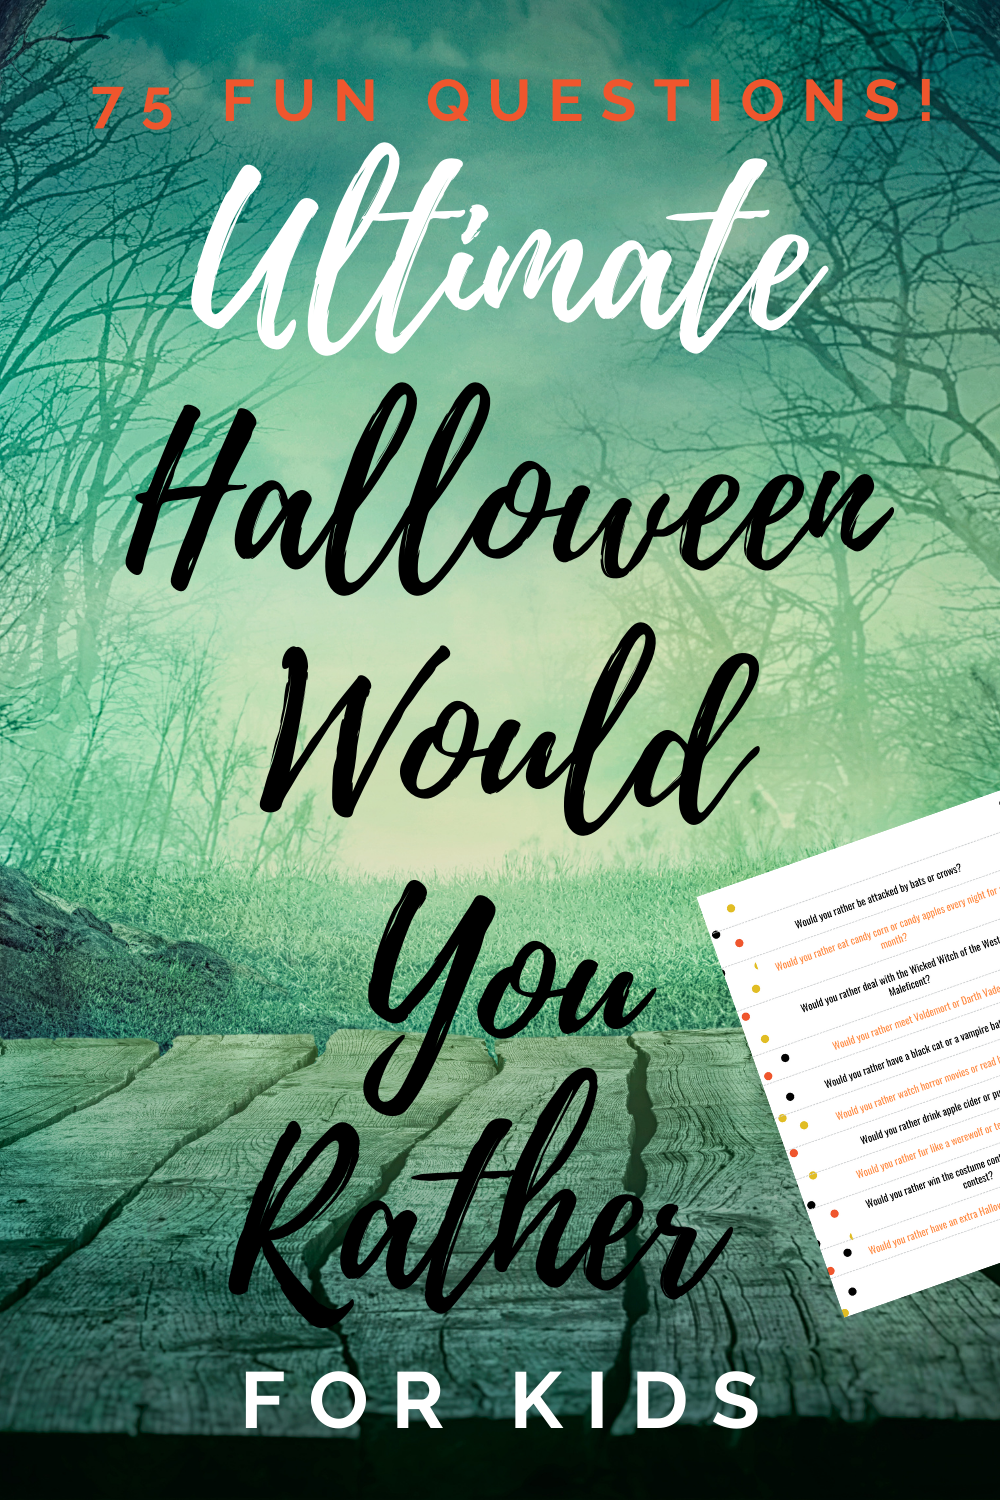 75 Awesome Halloween Would You Rather Questions to Ask Your Kids